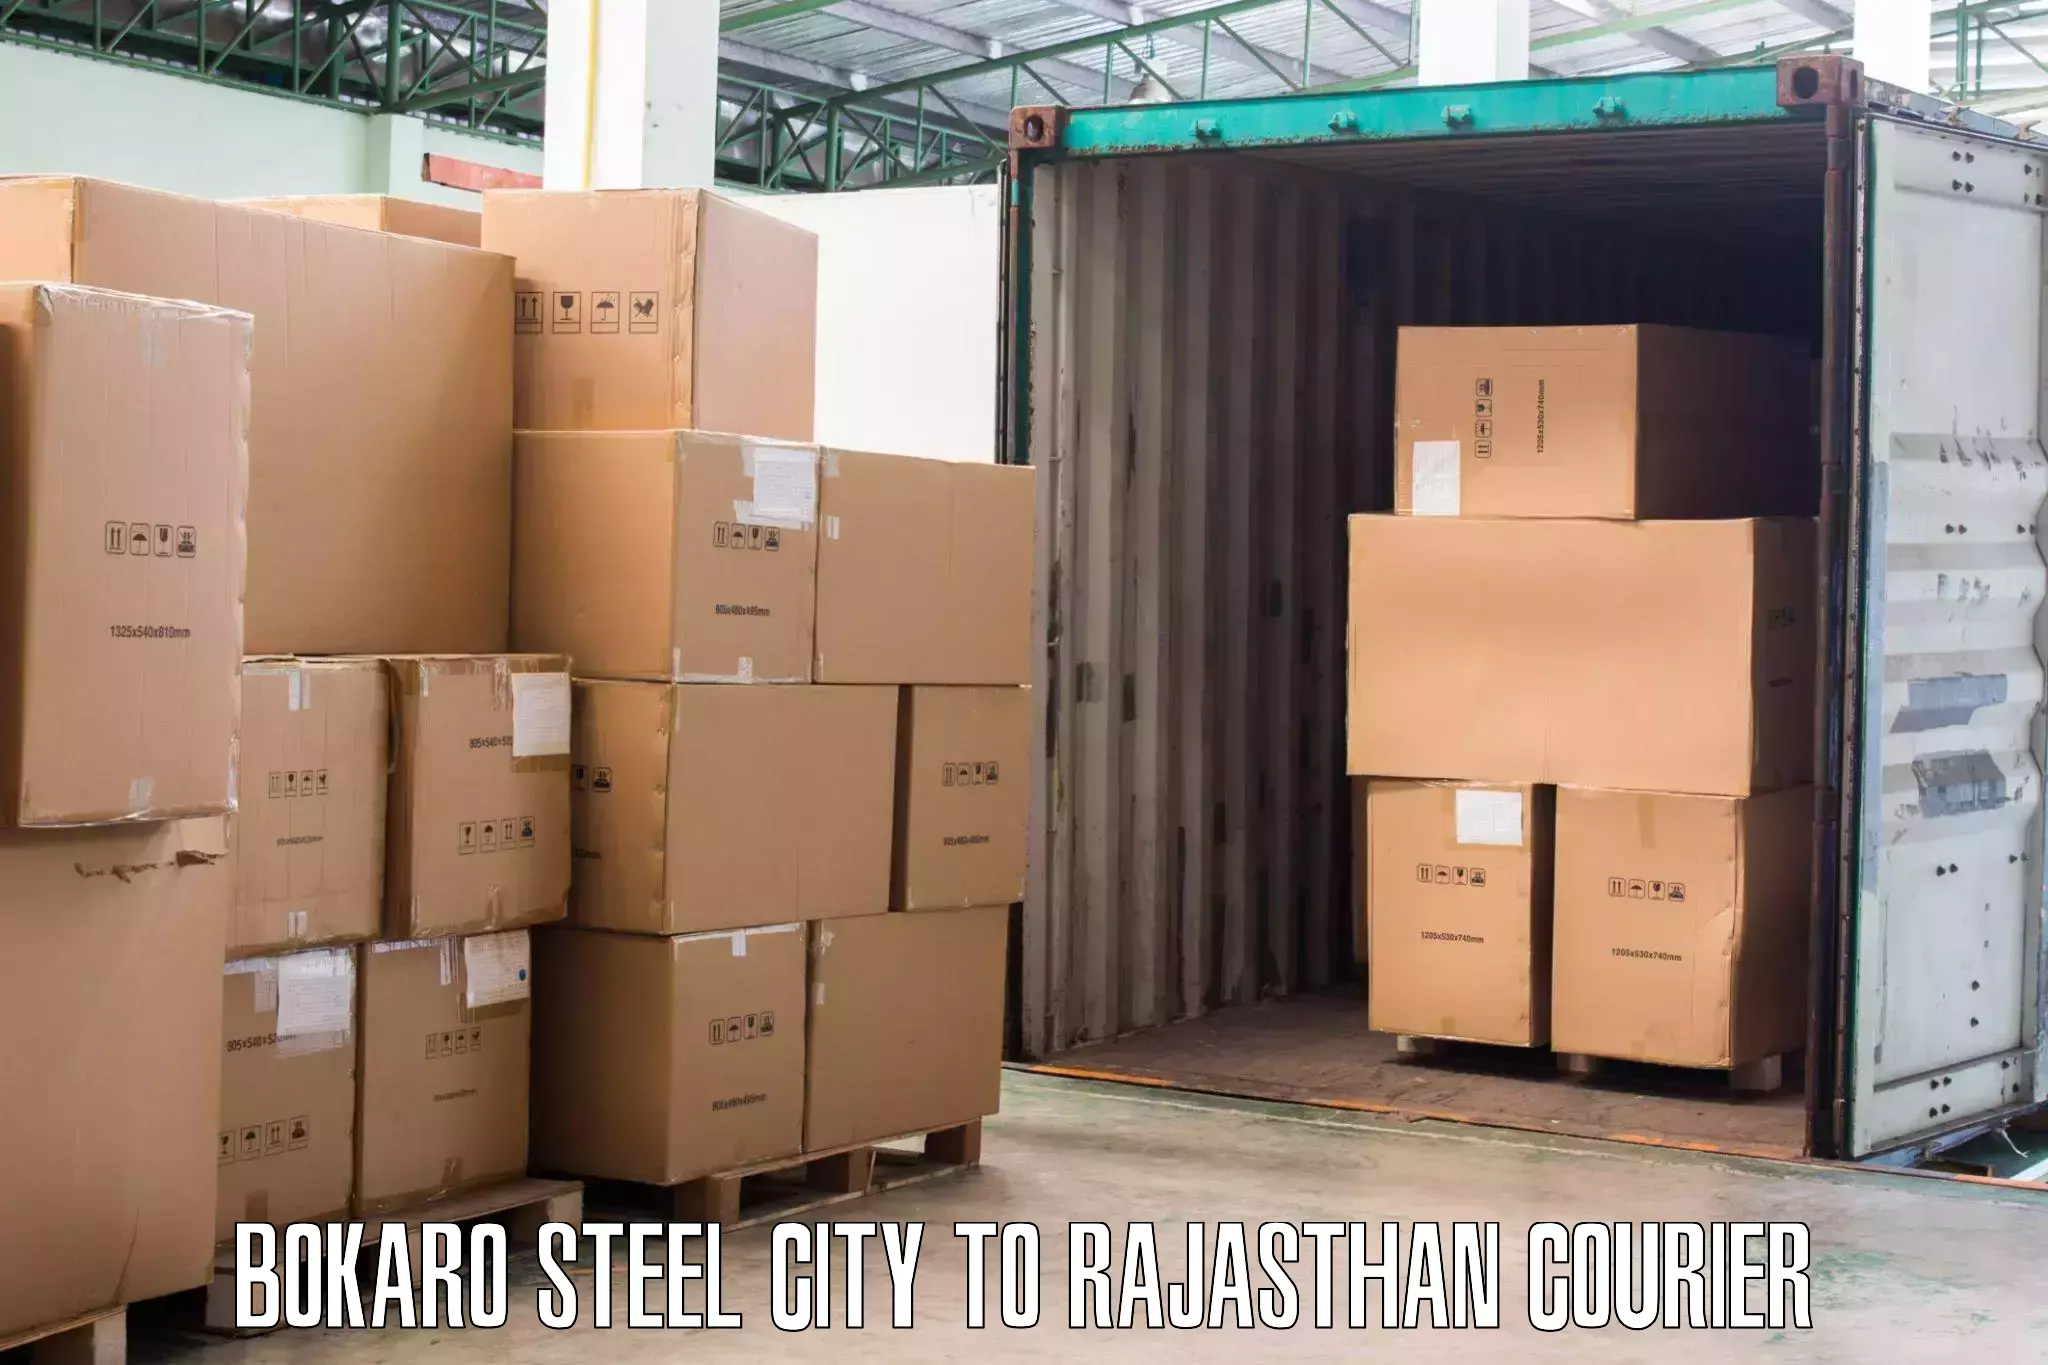 Moving and packing experts Bokaro Steel City to Bissau